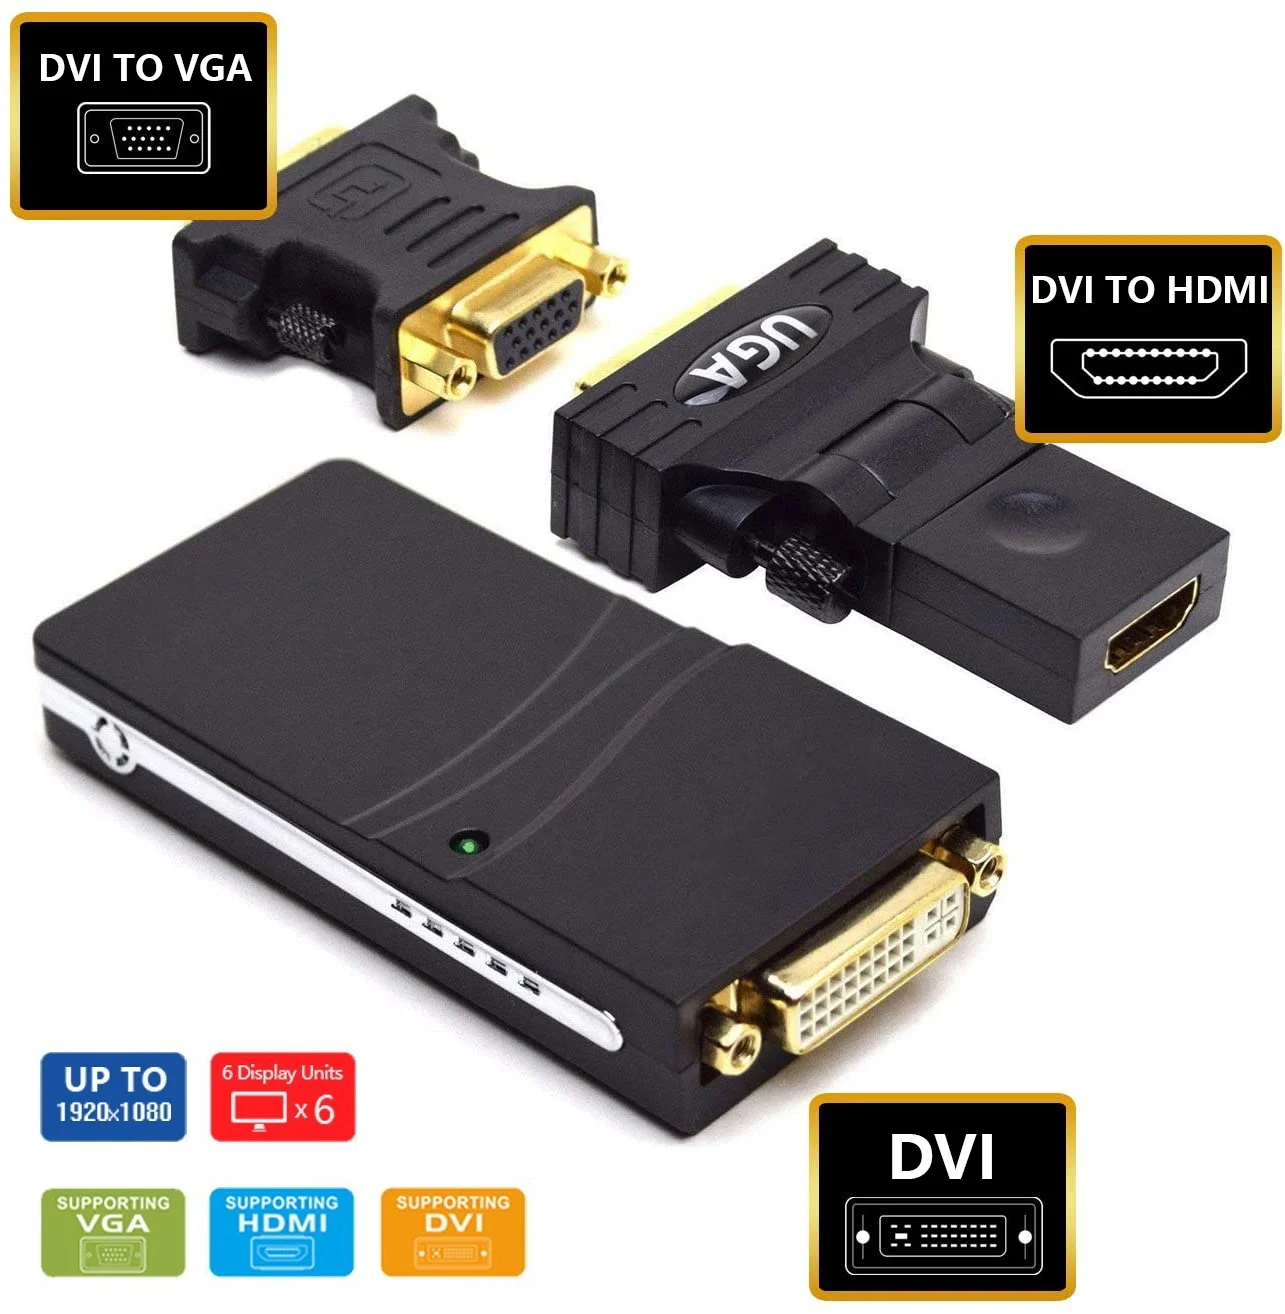 

USB 2.0 to DVI/VGA/HDMI Video Graphics Display Adapter (HDTV CRT LCD Projector) Displaylink Supports Windows 10/8.1/8/7